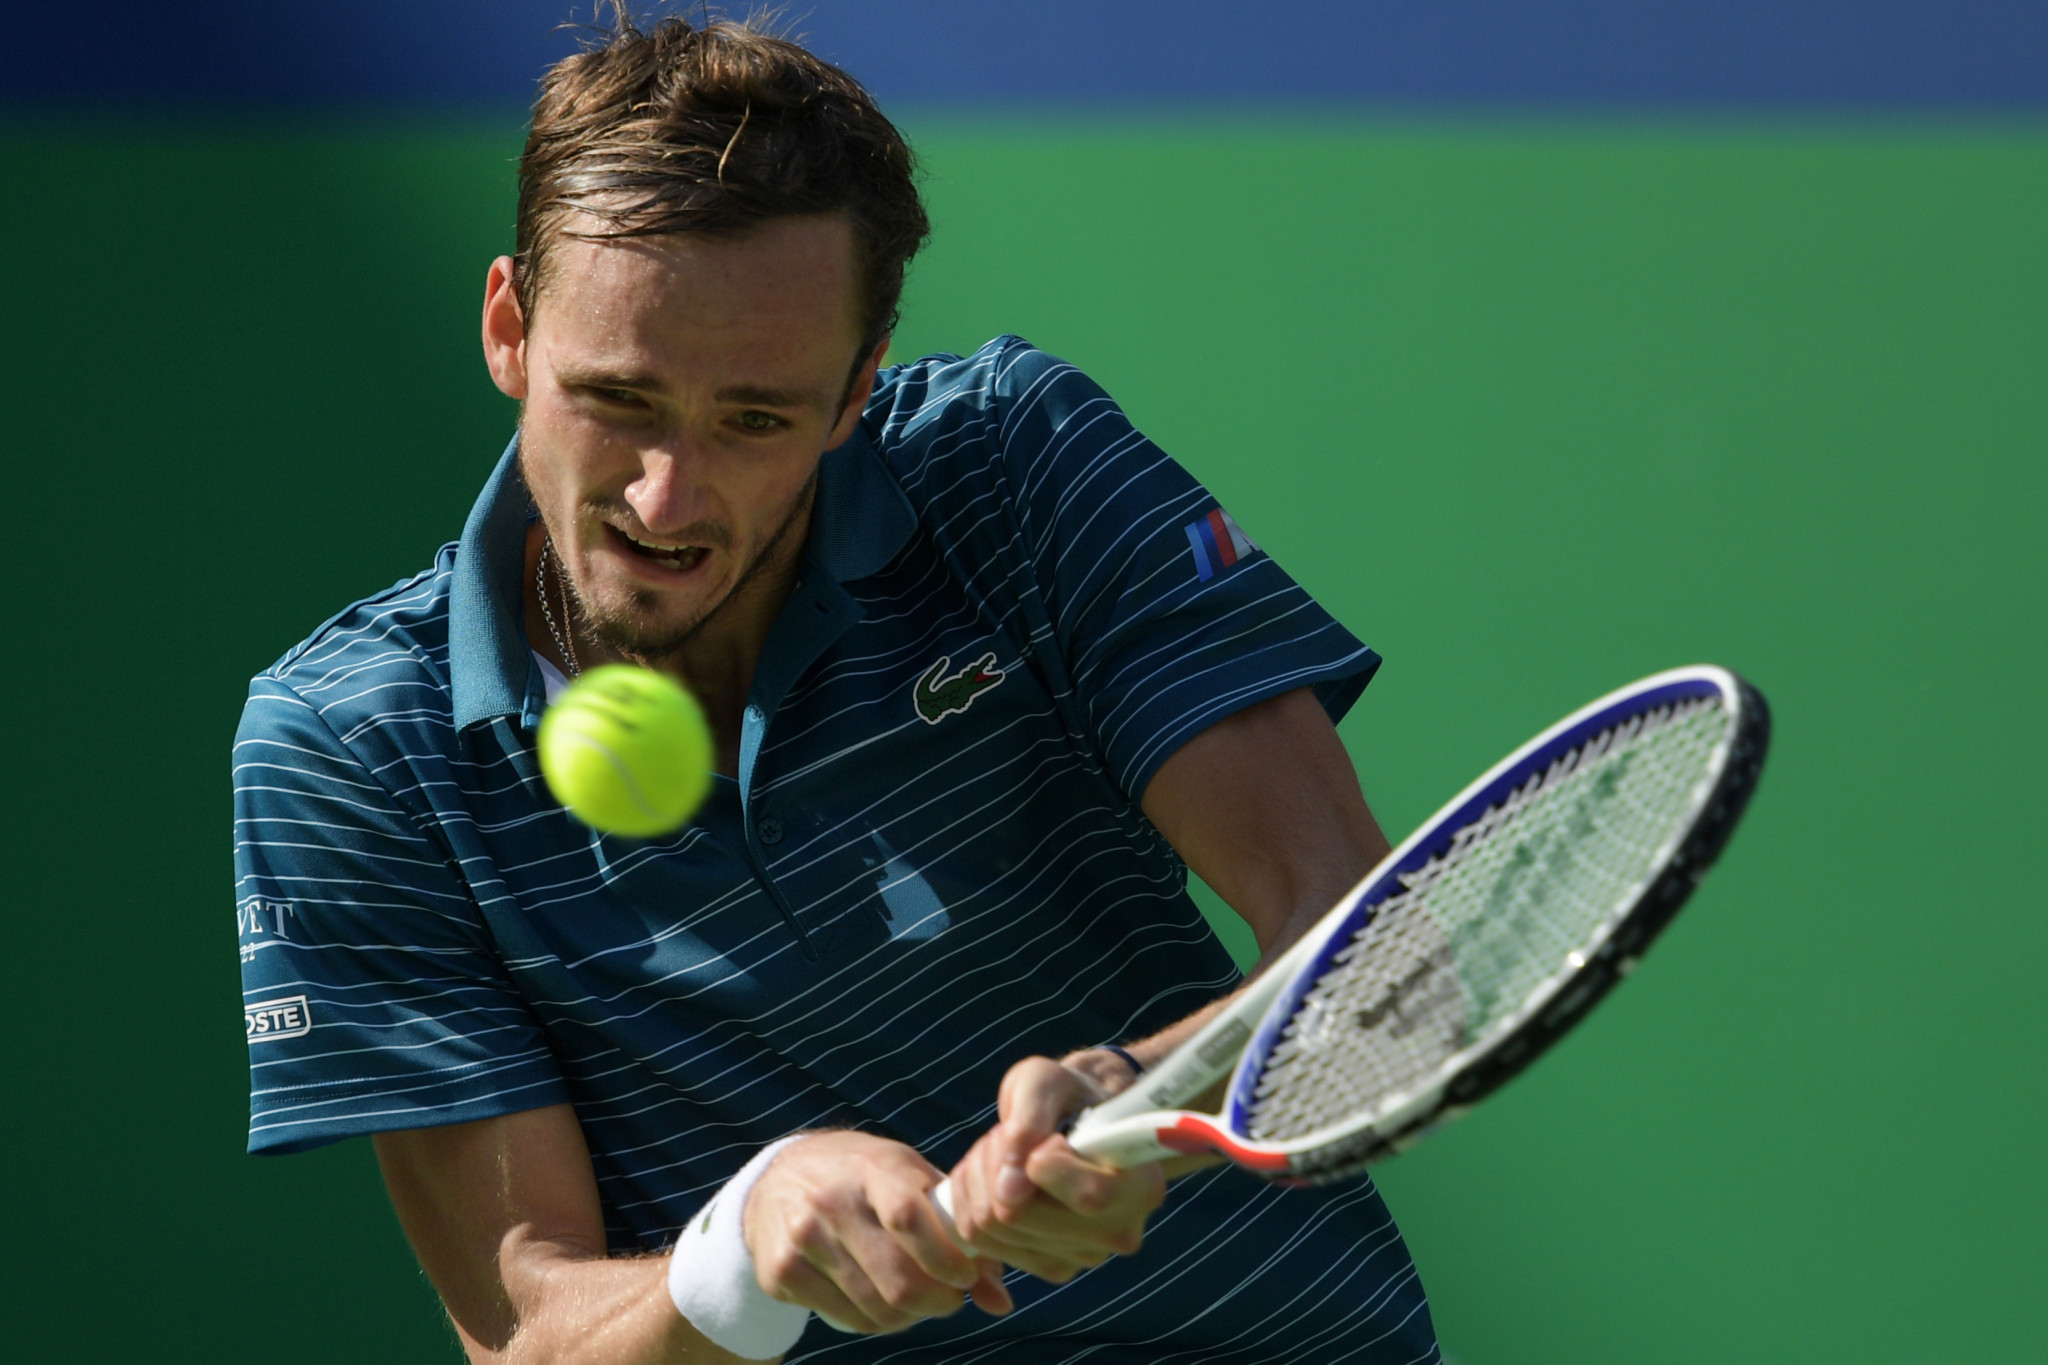 Third-seeded Russian Daniil Medvedev is through to the last eight ©Getty Images